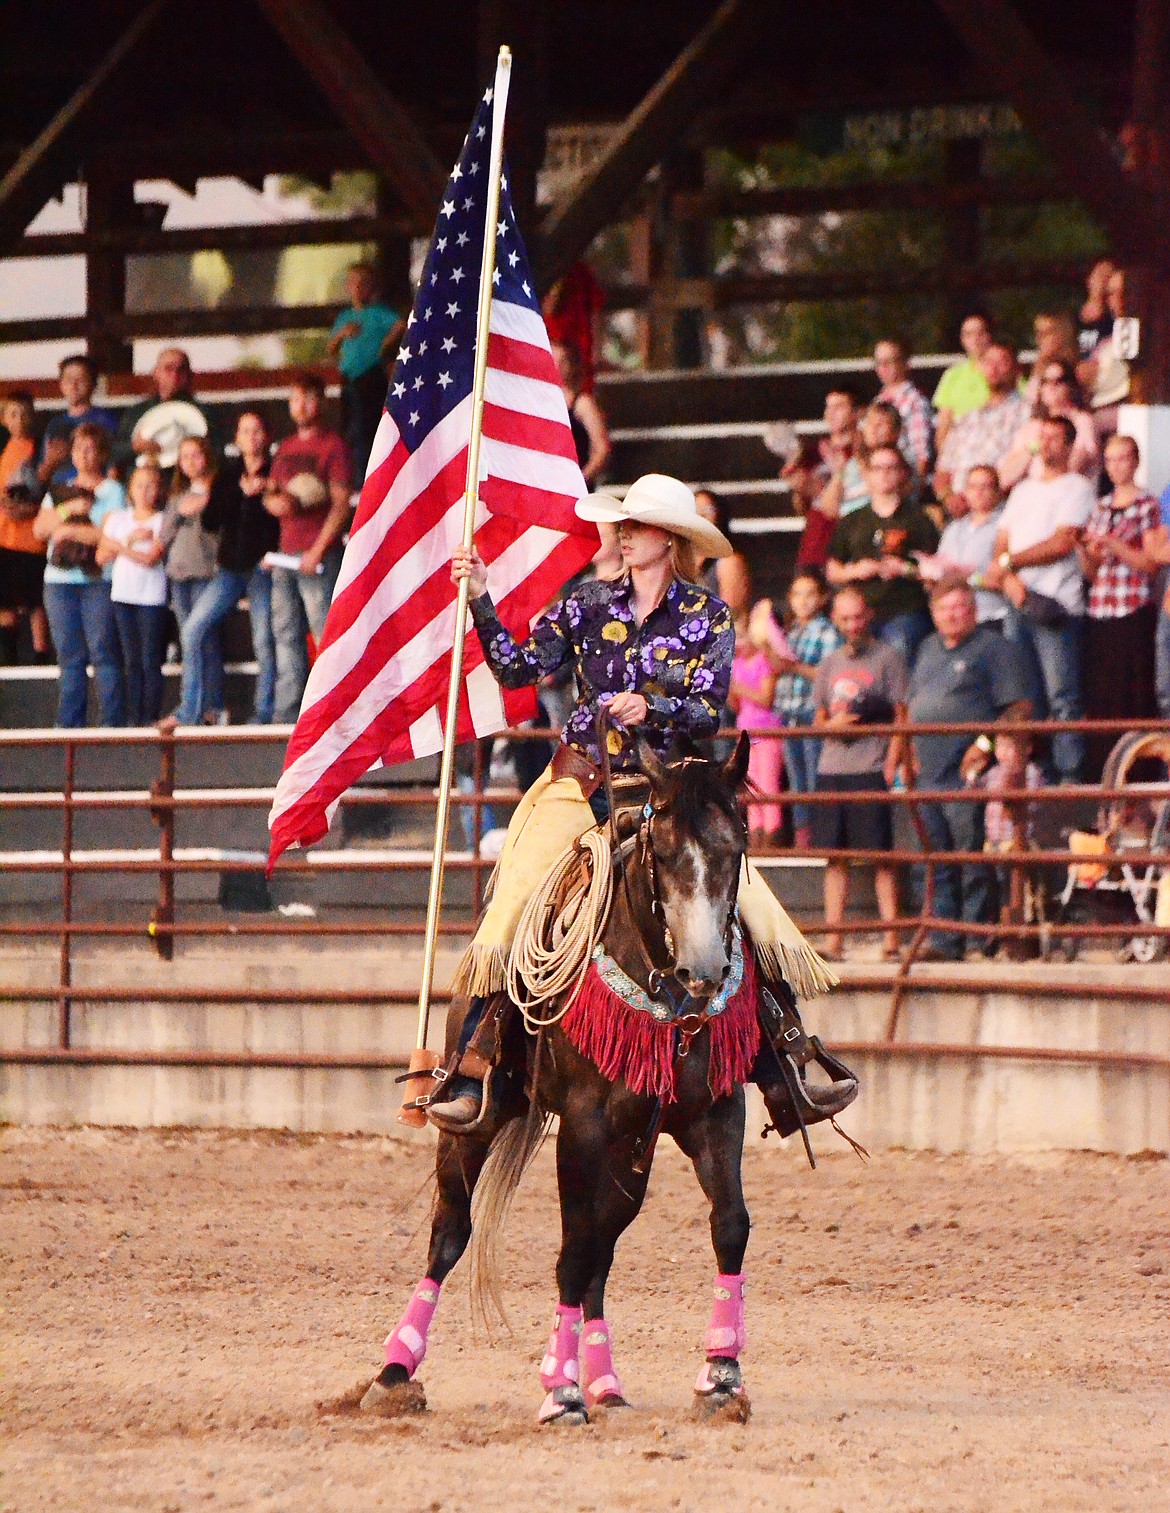 Thompson Falls native Paula Symington and her horse Hooey carried the American Flag each night of the rodeo. (Erin Jusseaume/ Clark Fork Valley Press)